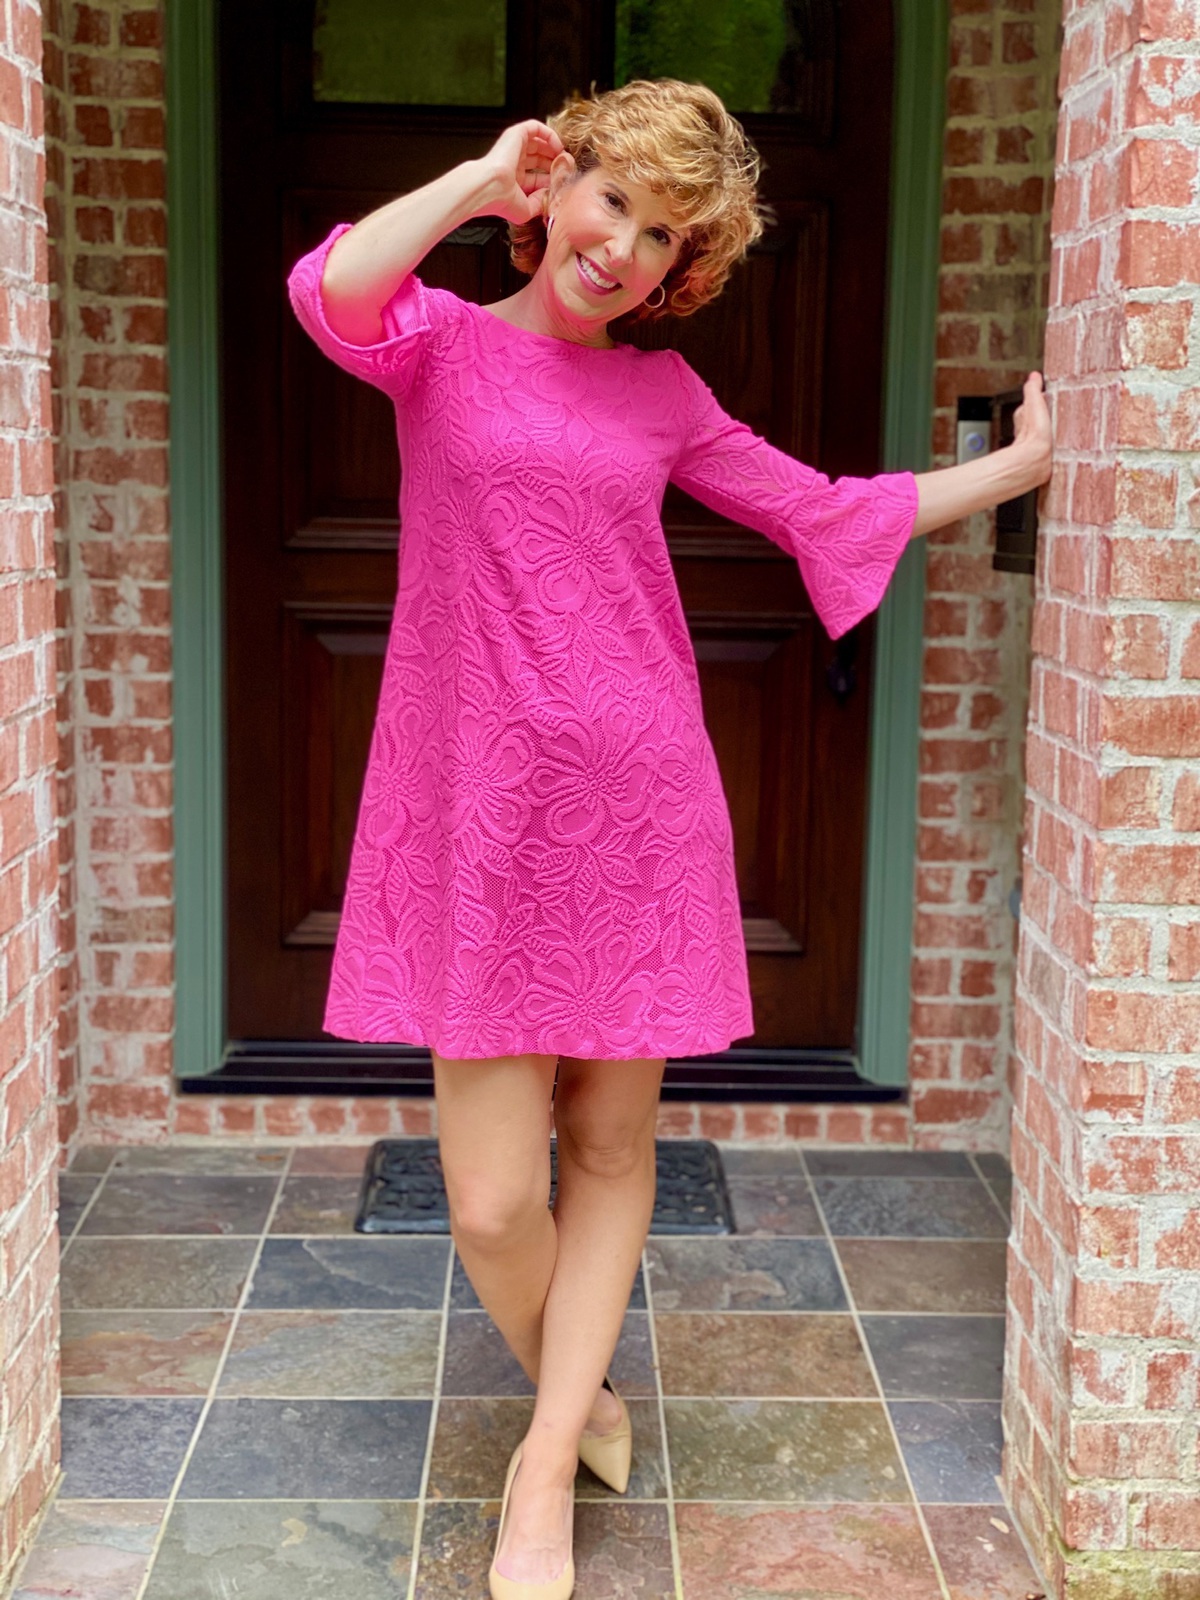 woman wearing neon pink dress standing on front porch